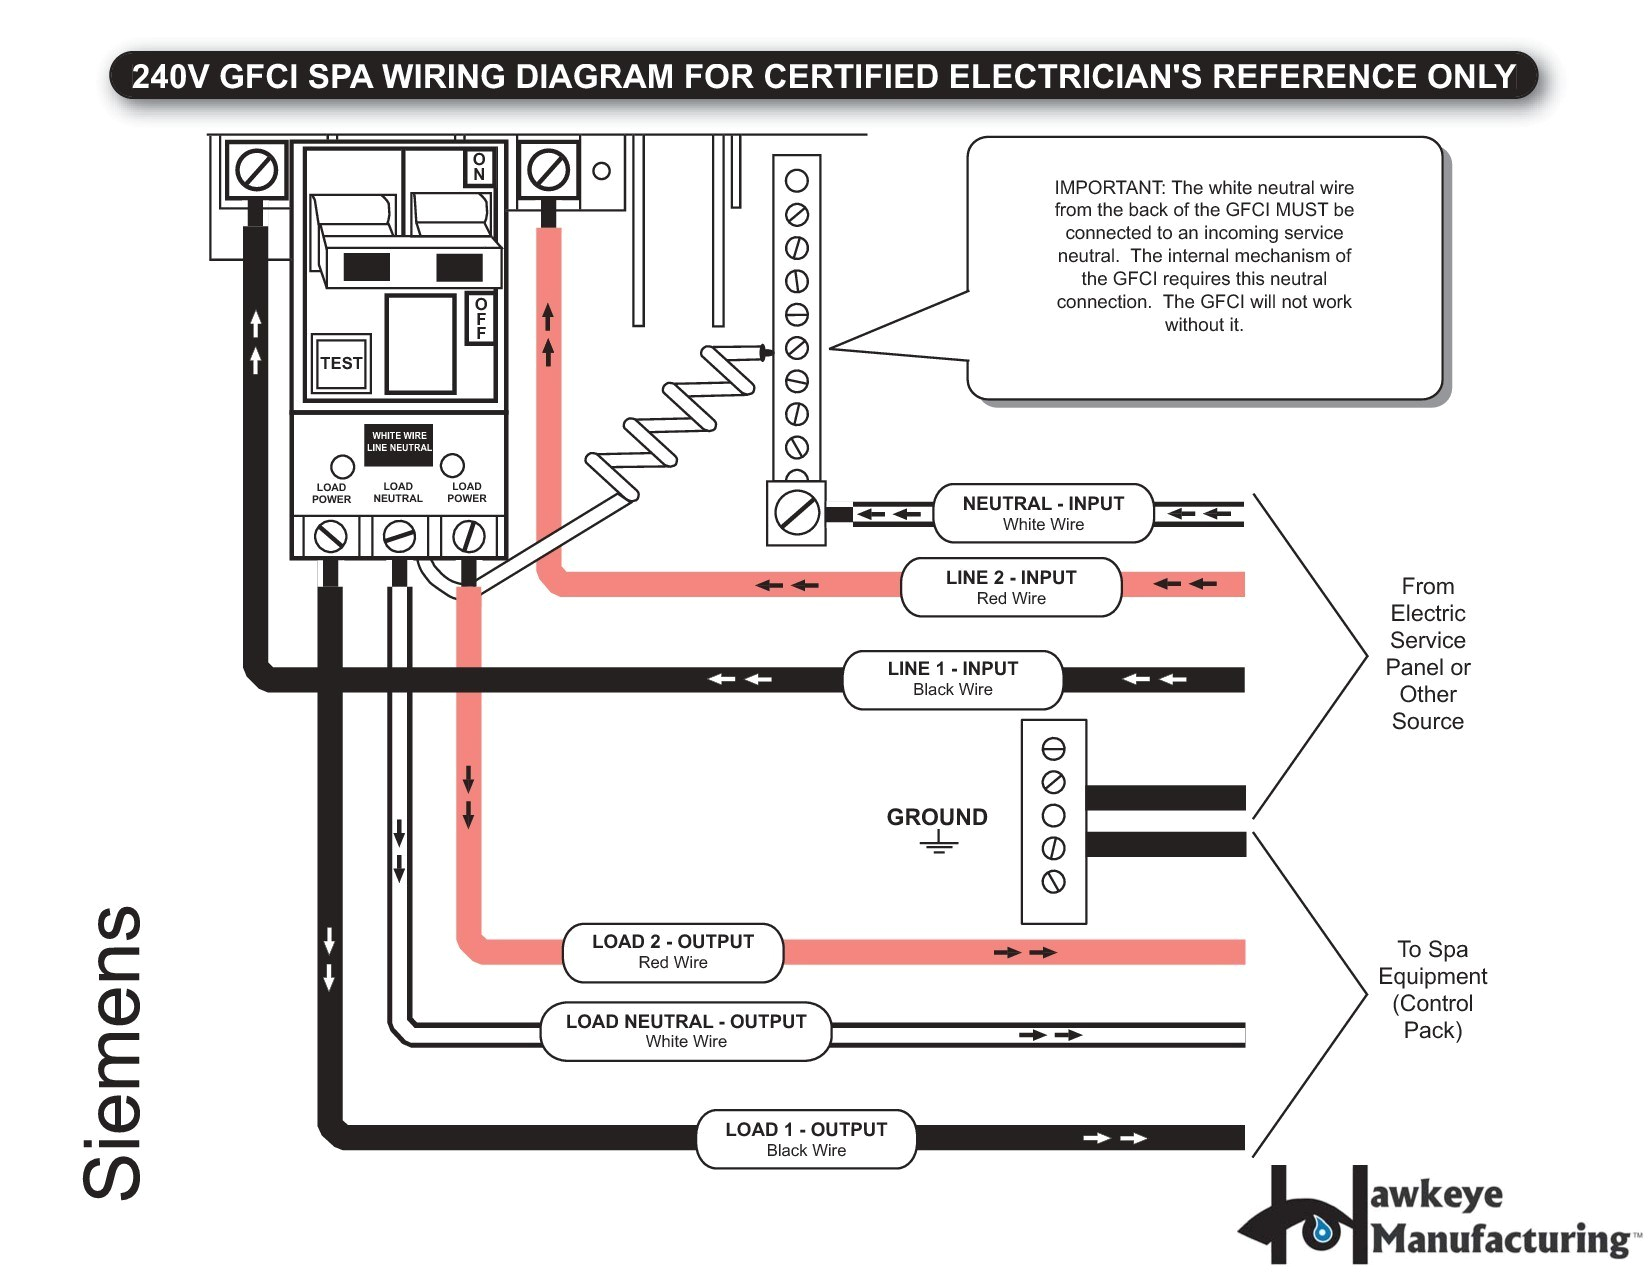 vita spa l200 wiring diagram magnificent wiring diagram for hot tub t best images for wiring rh oursweetbakeshop info balboa spa pack wiring diagram viking spa wiring diagram 4n jpg